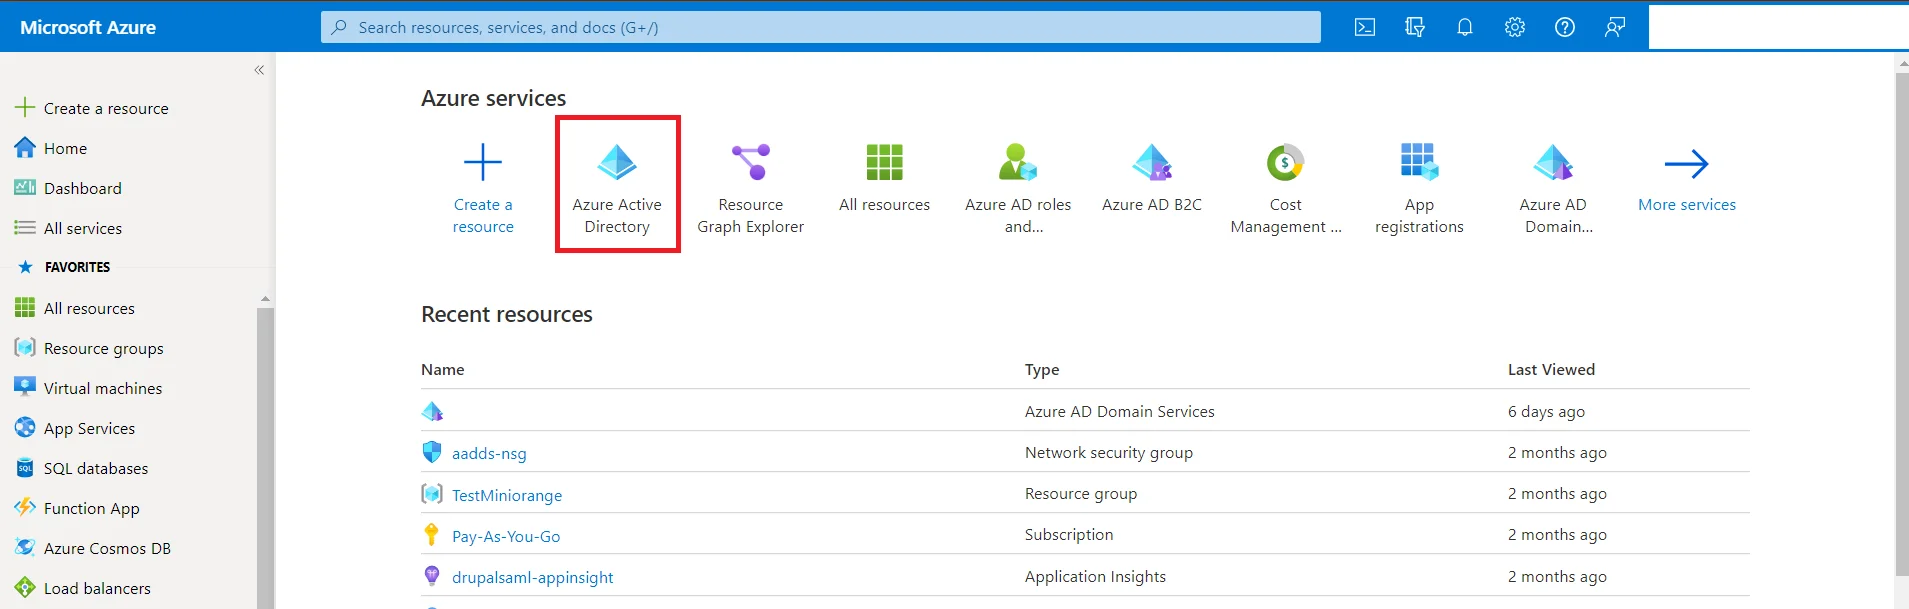 Azure AD Single Sign On  (SSO) (Active Directory) Oauth OIDC Joomla, Microsoft Azure AD (Active Directory) SSO Login